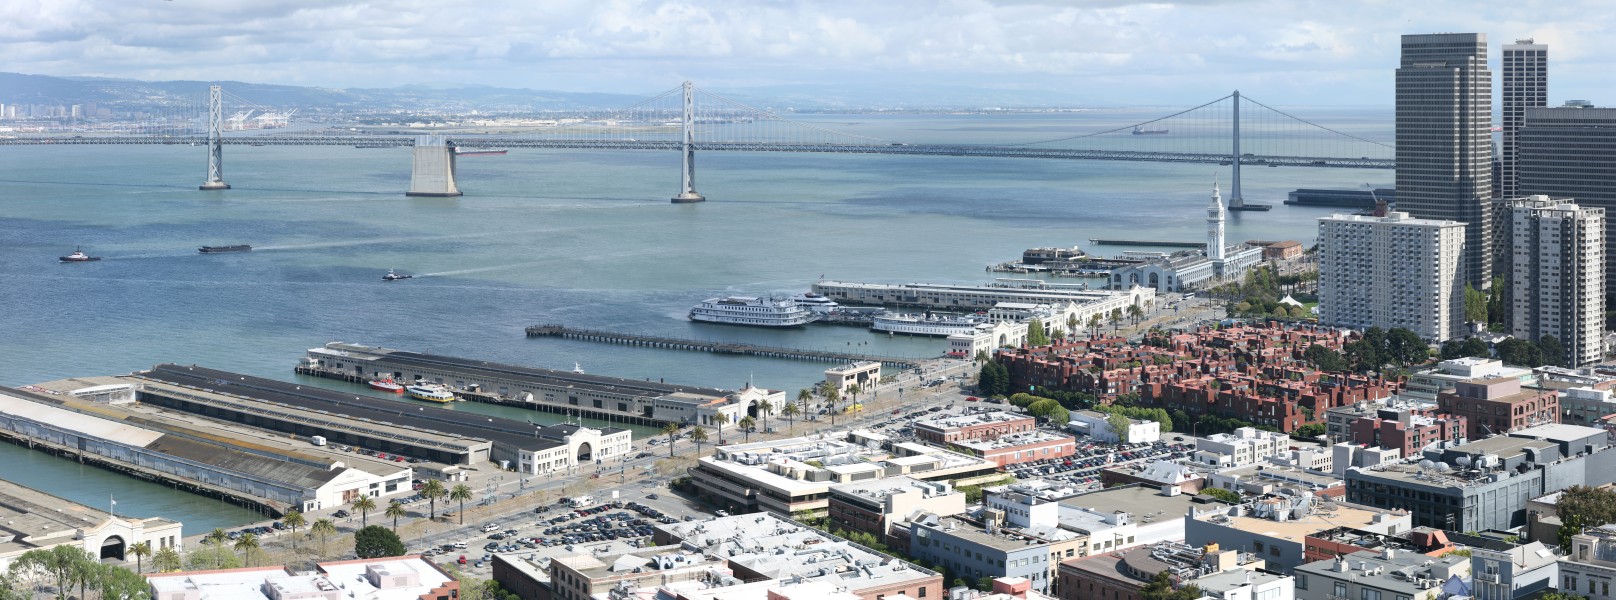 Embarcadero from Coit Tower